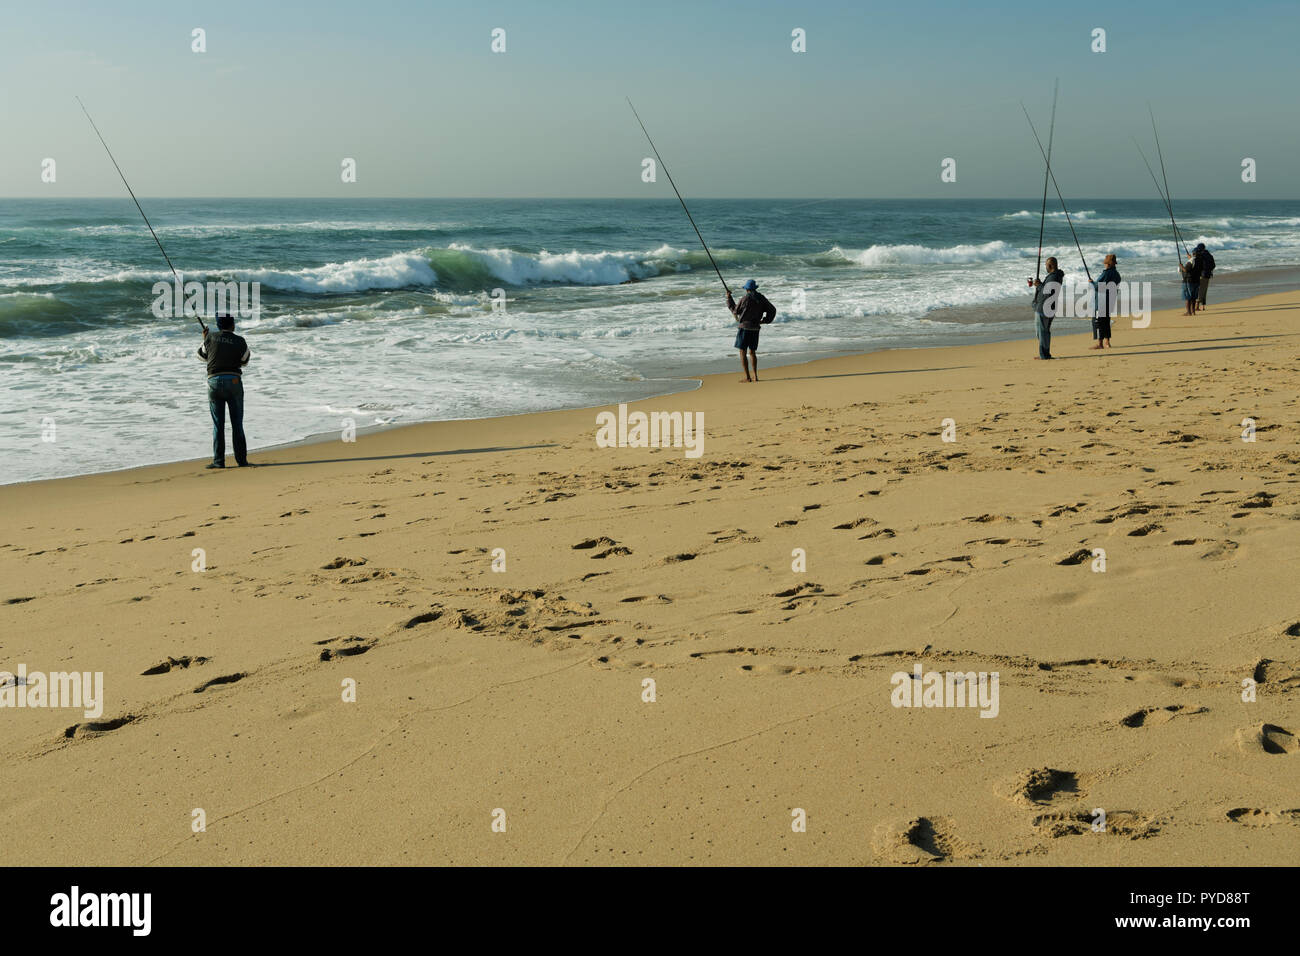 Durban, KwaZulu-Natal, South Africa, group, six adult fishermen holding fishing rods and standing on sandy beach at mid morning, The Bluff, landscape Stock Photo